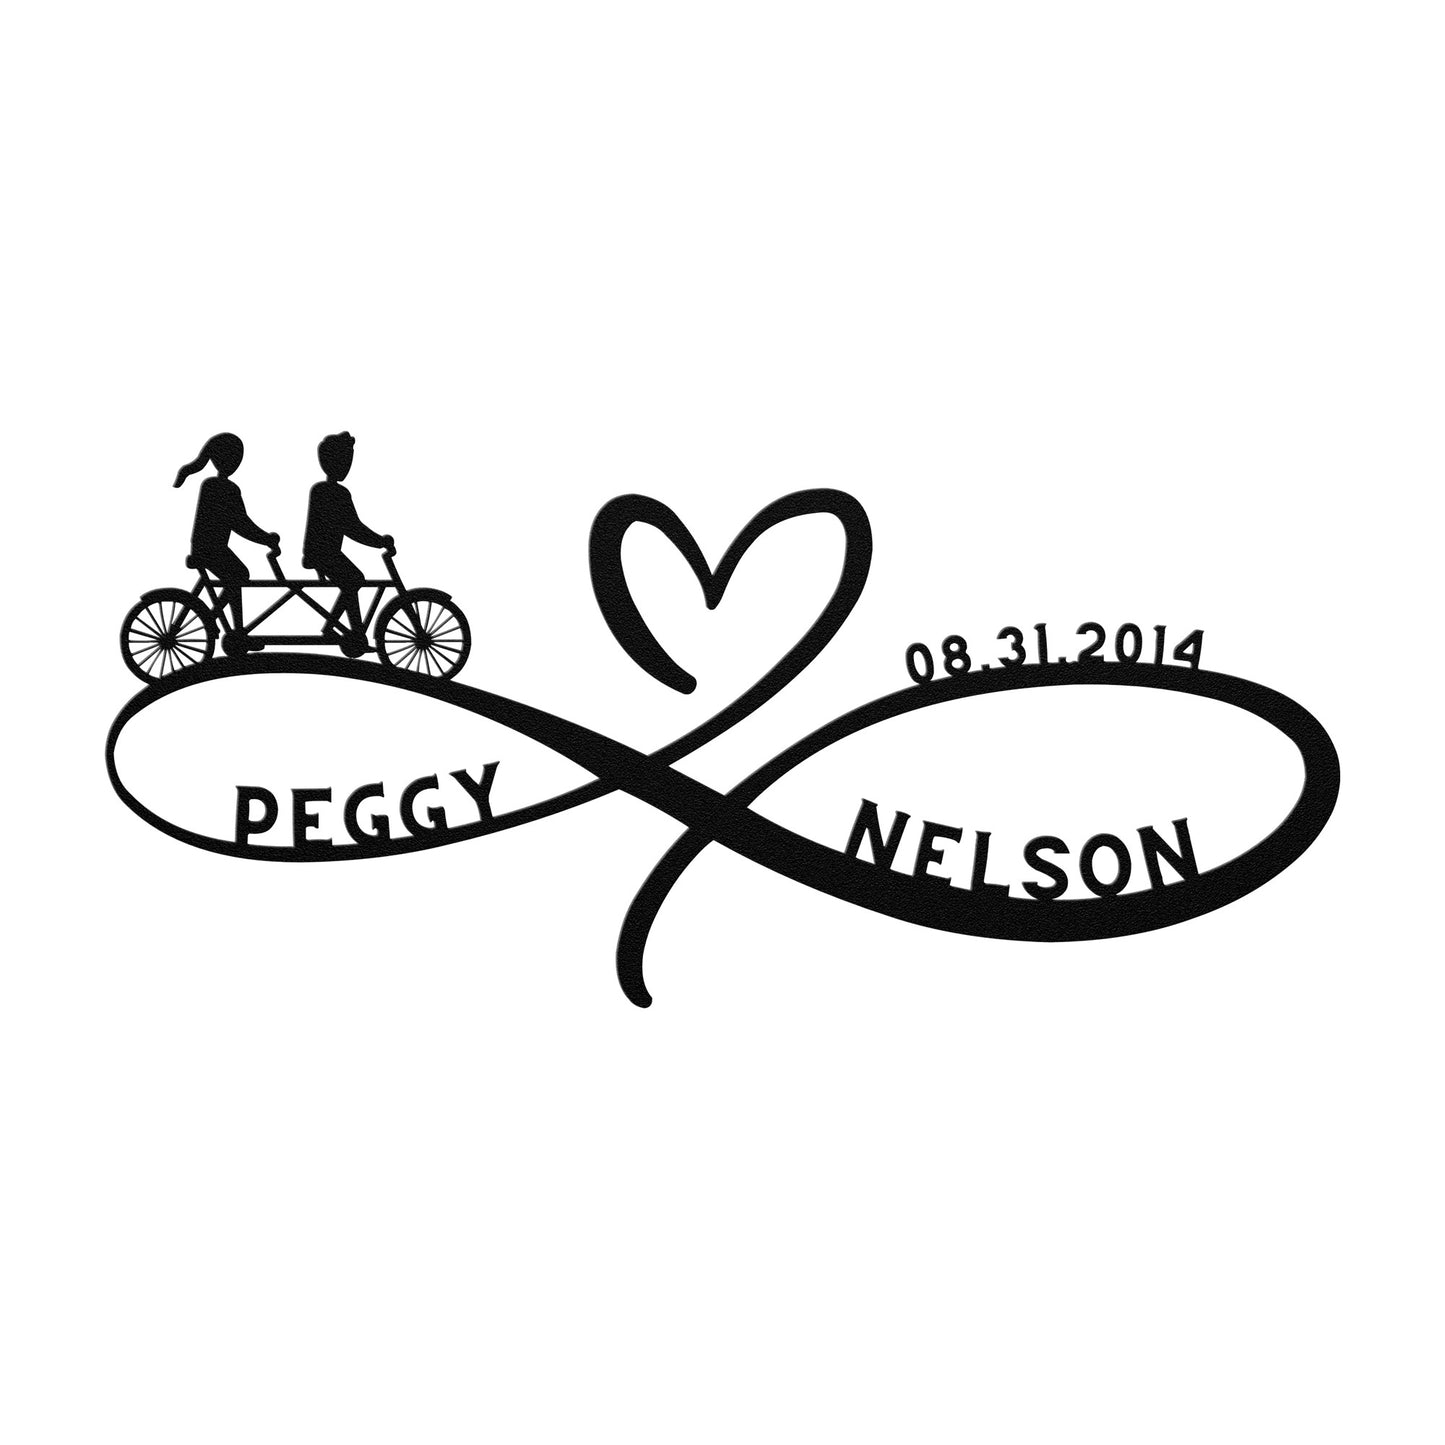 A black and white teelaunch metal sign of the Personalized Infinity Love Heart Metal Sign For Cycling Couples, perfect for home decor.